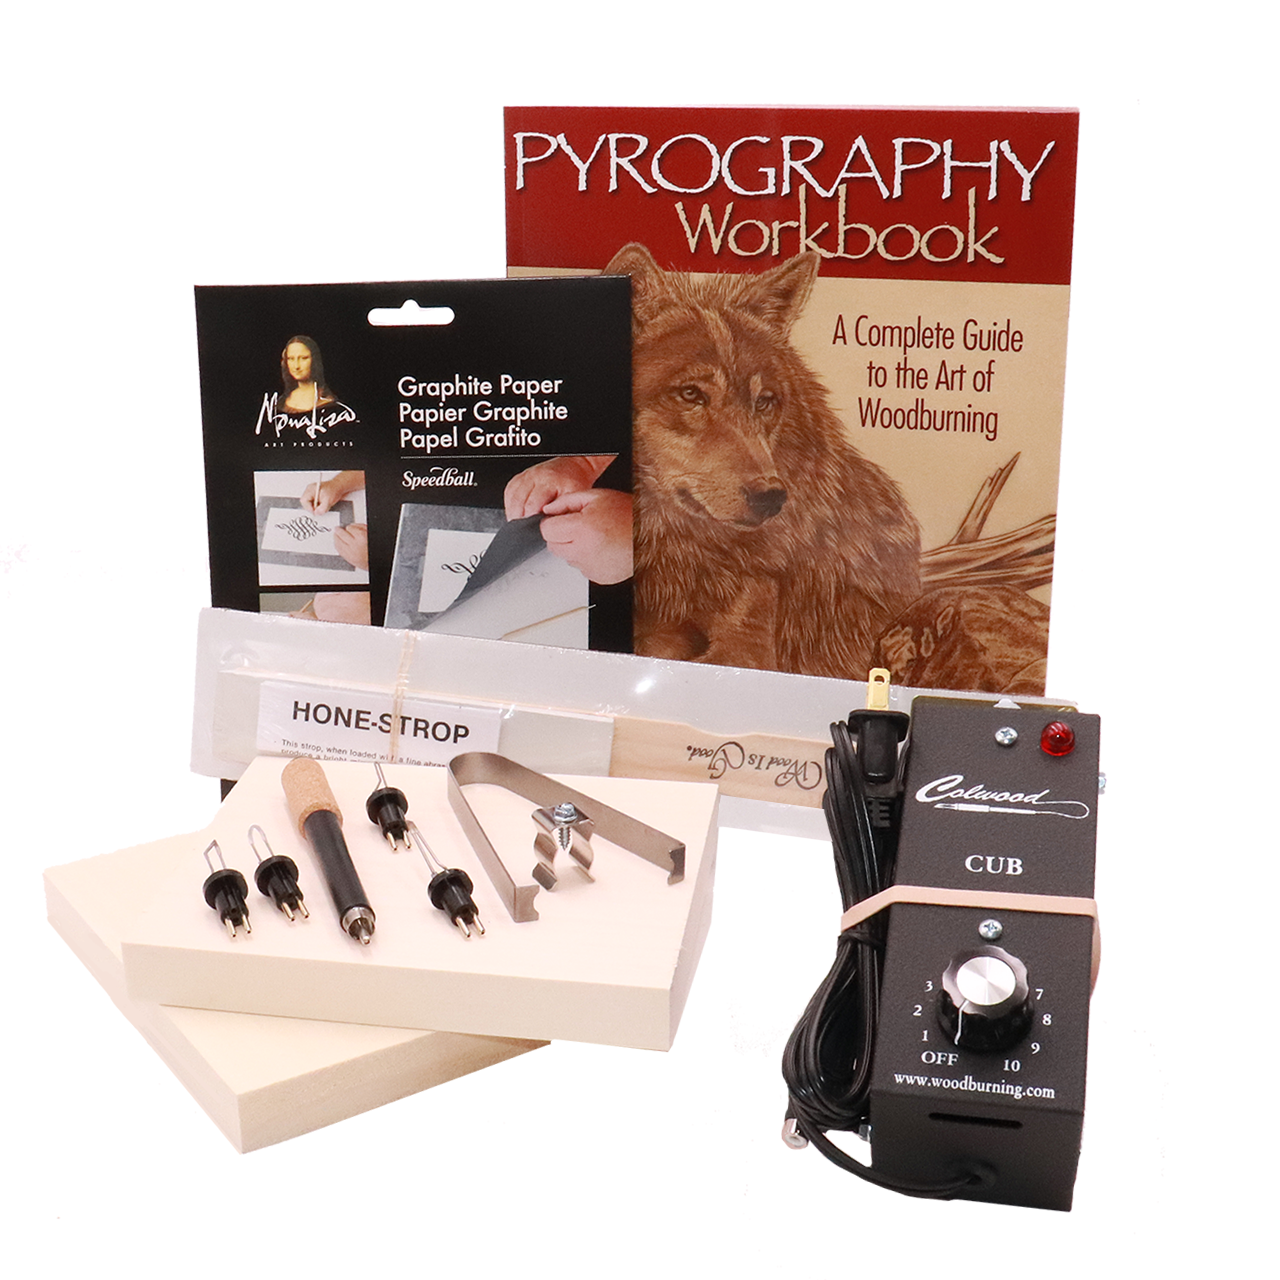 ArtSkills Wood Burning Kit for Beginners - Deluxe Pyrography Wood